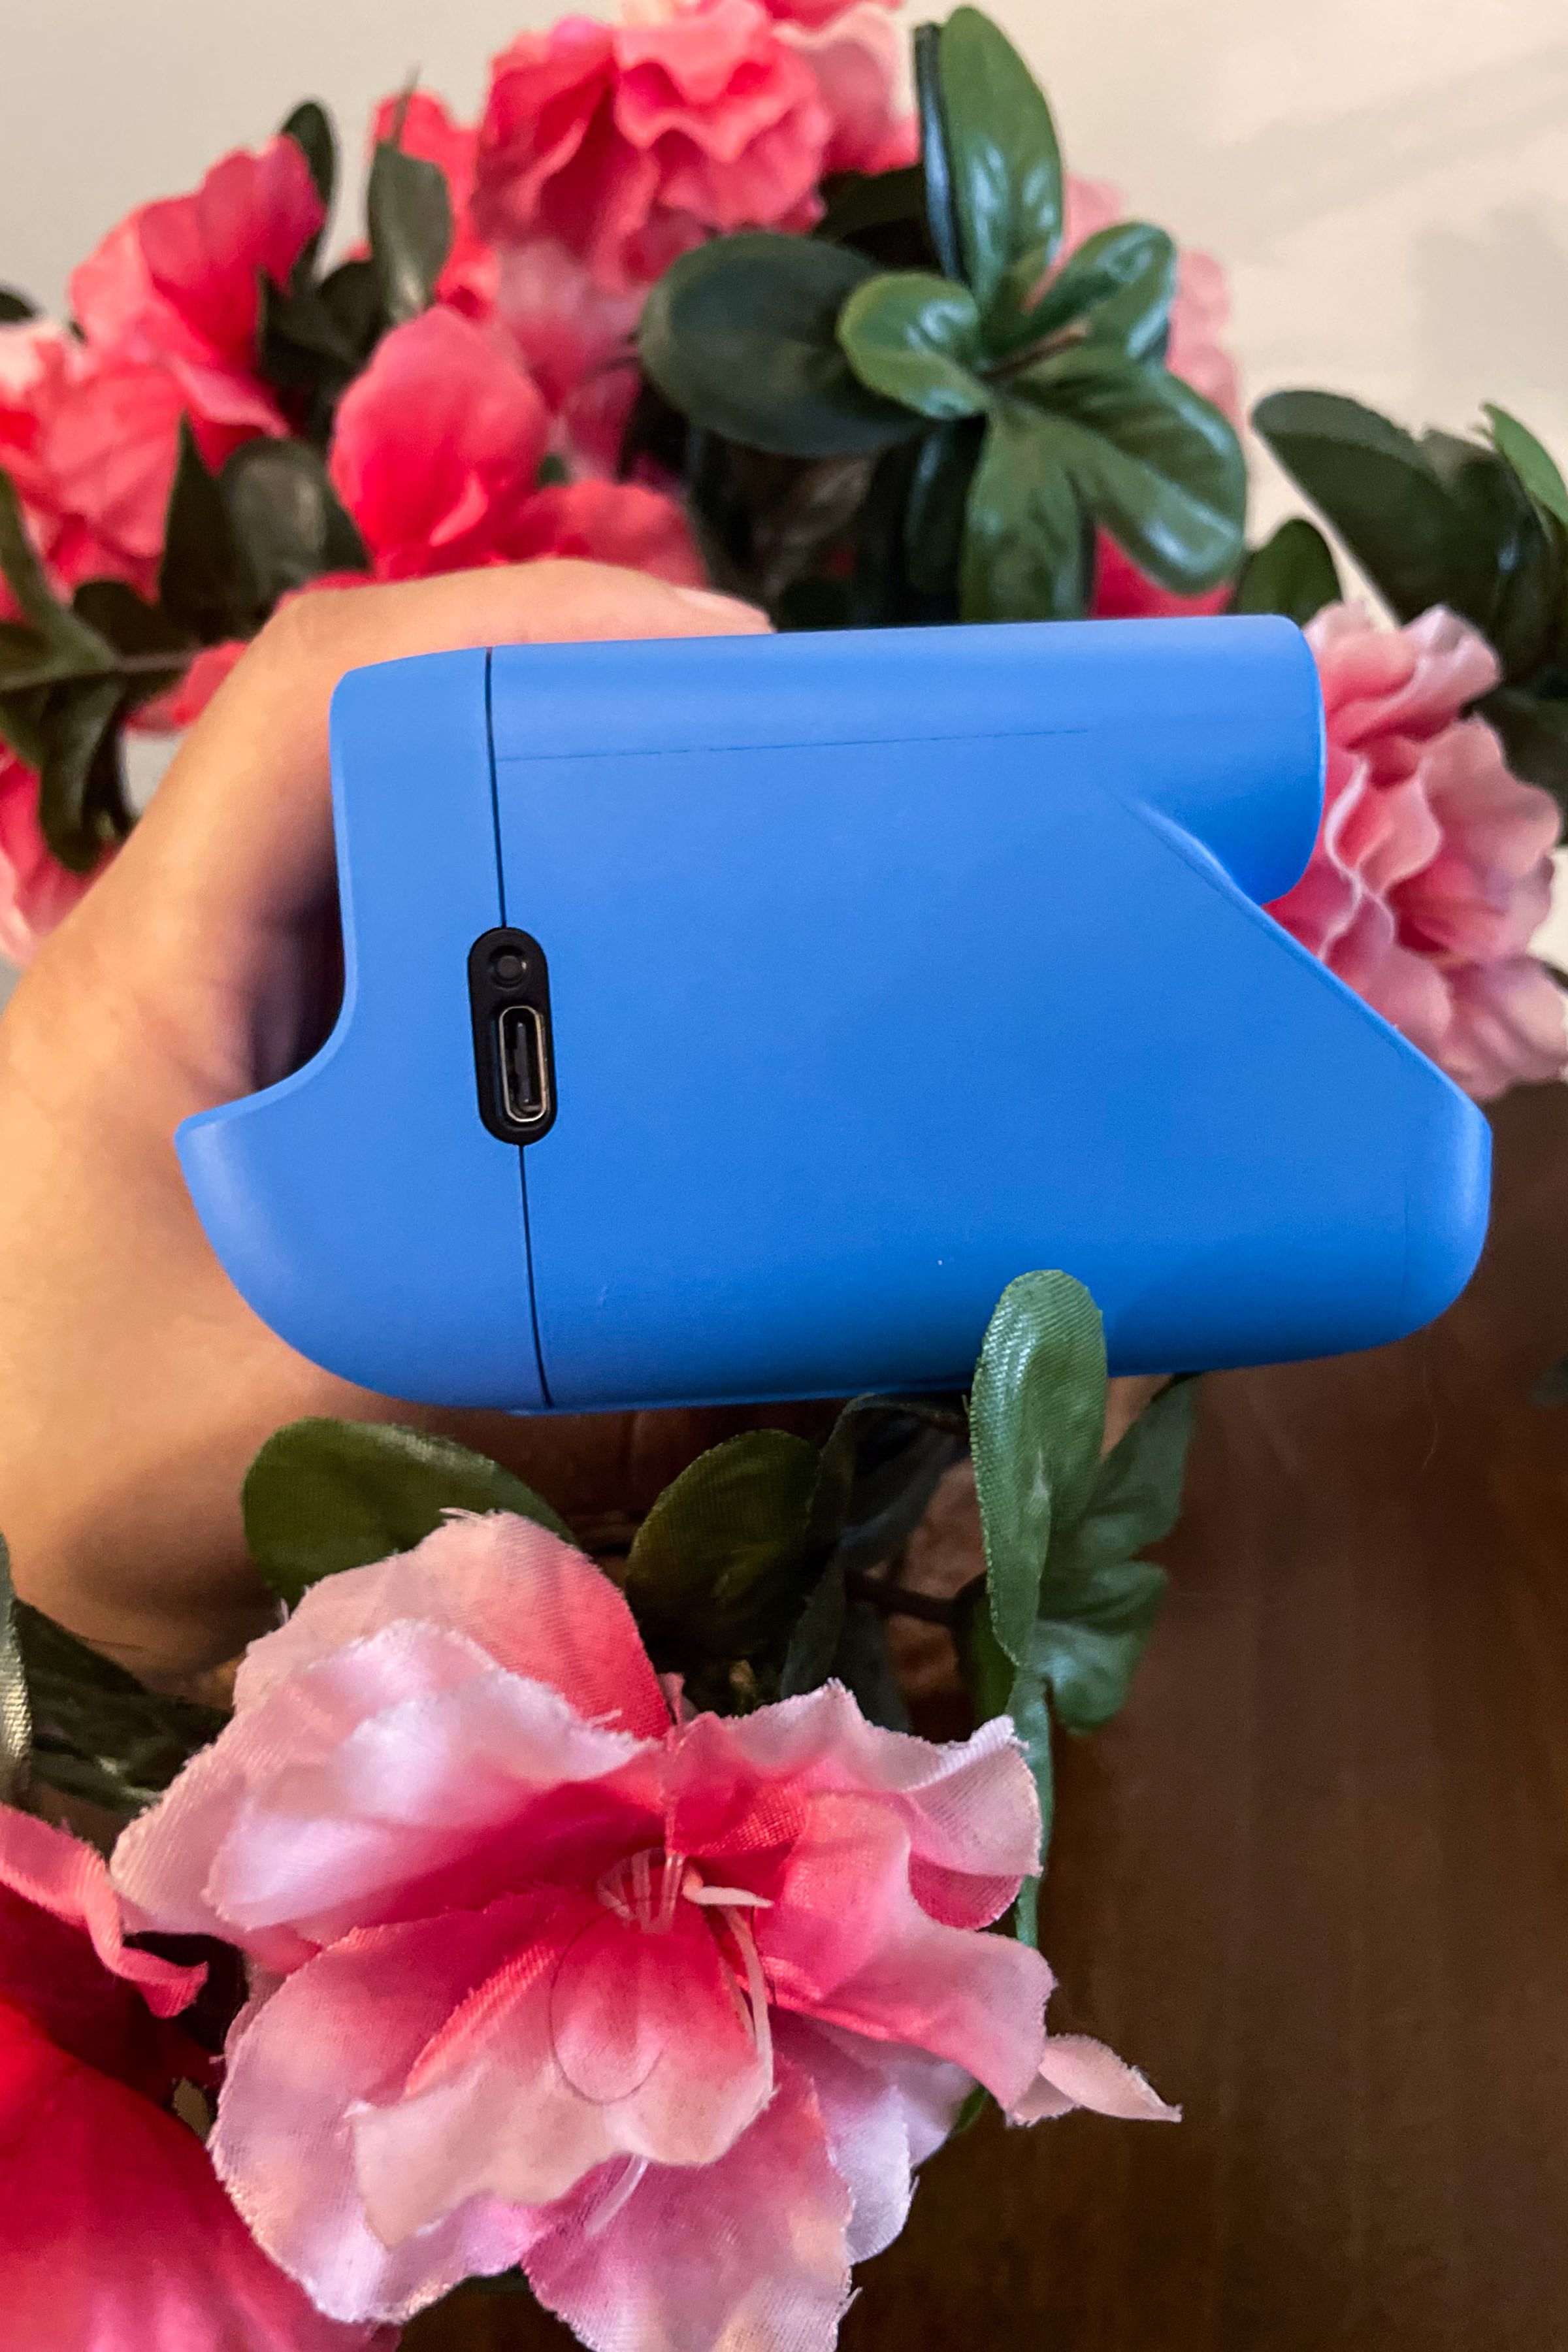 The latest Polaroid Go comes with USB-C support, as opposed to Micro USB.